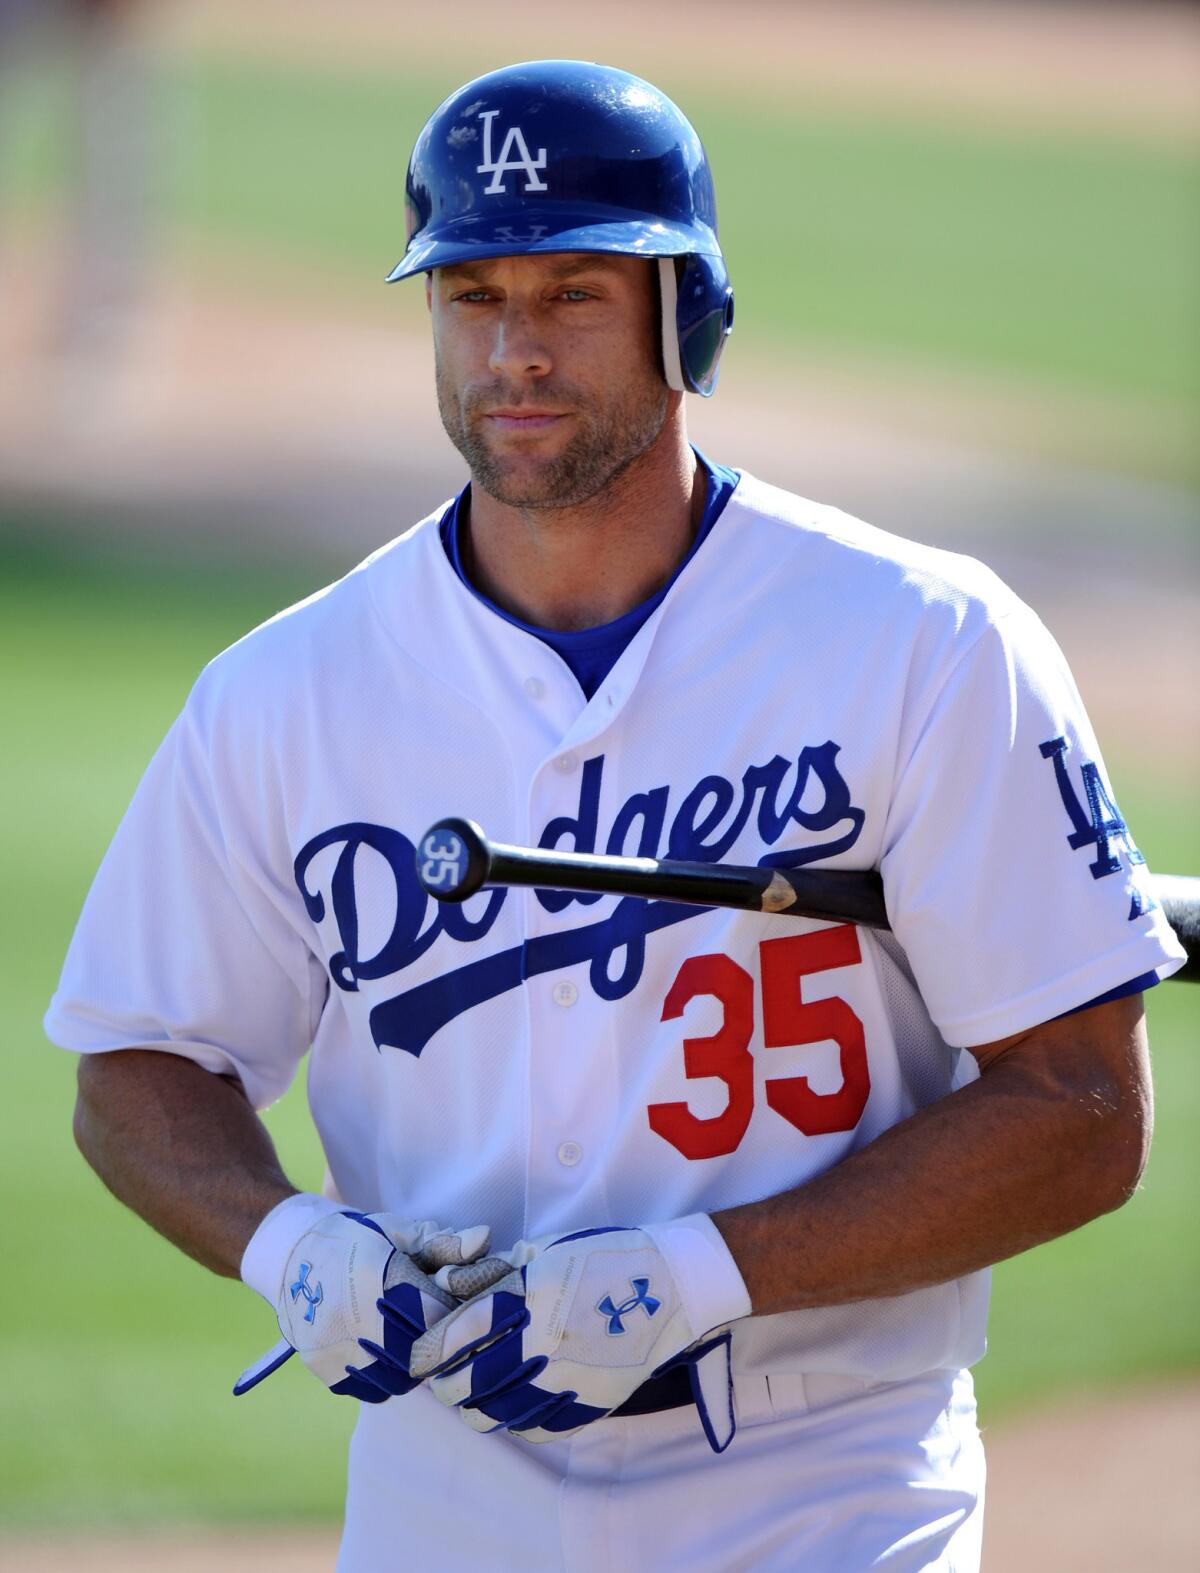 Will Gabe Kapler be the next manager of the Dodgers?